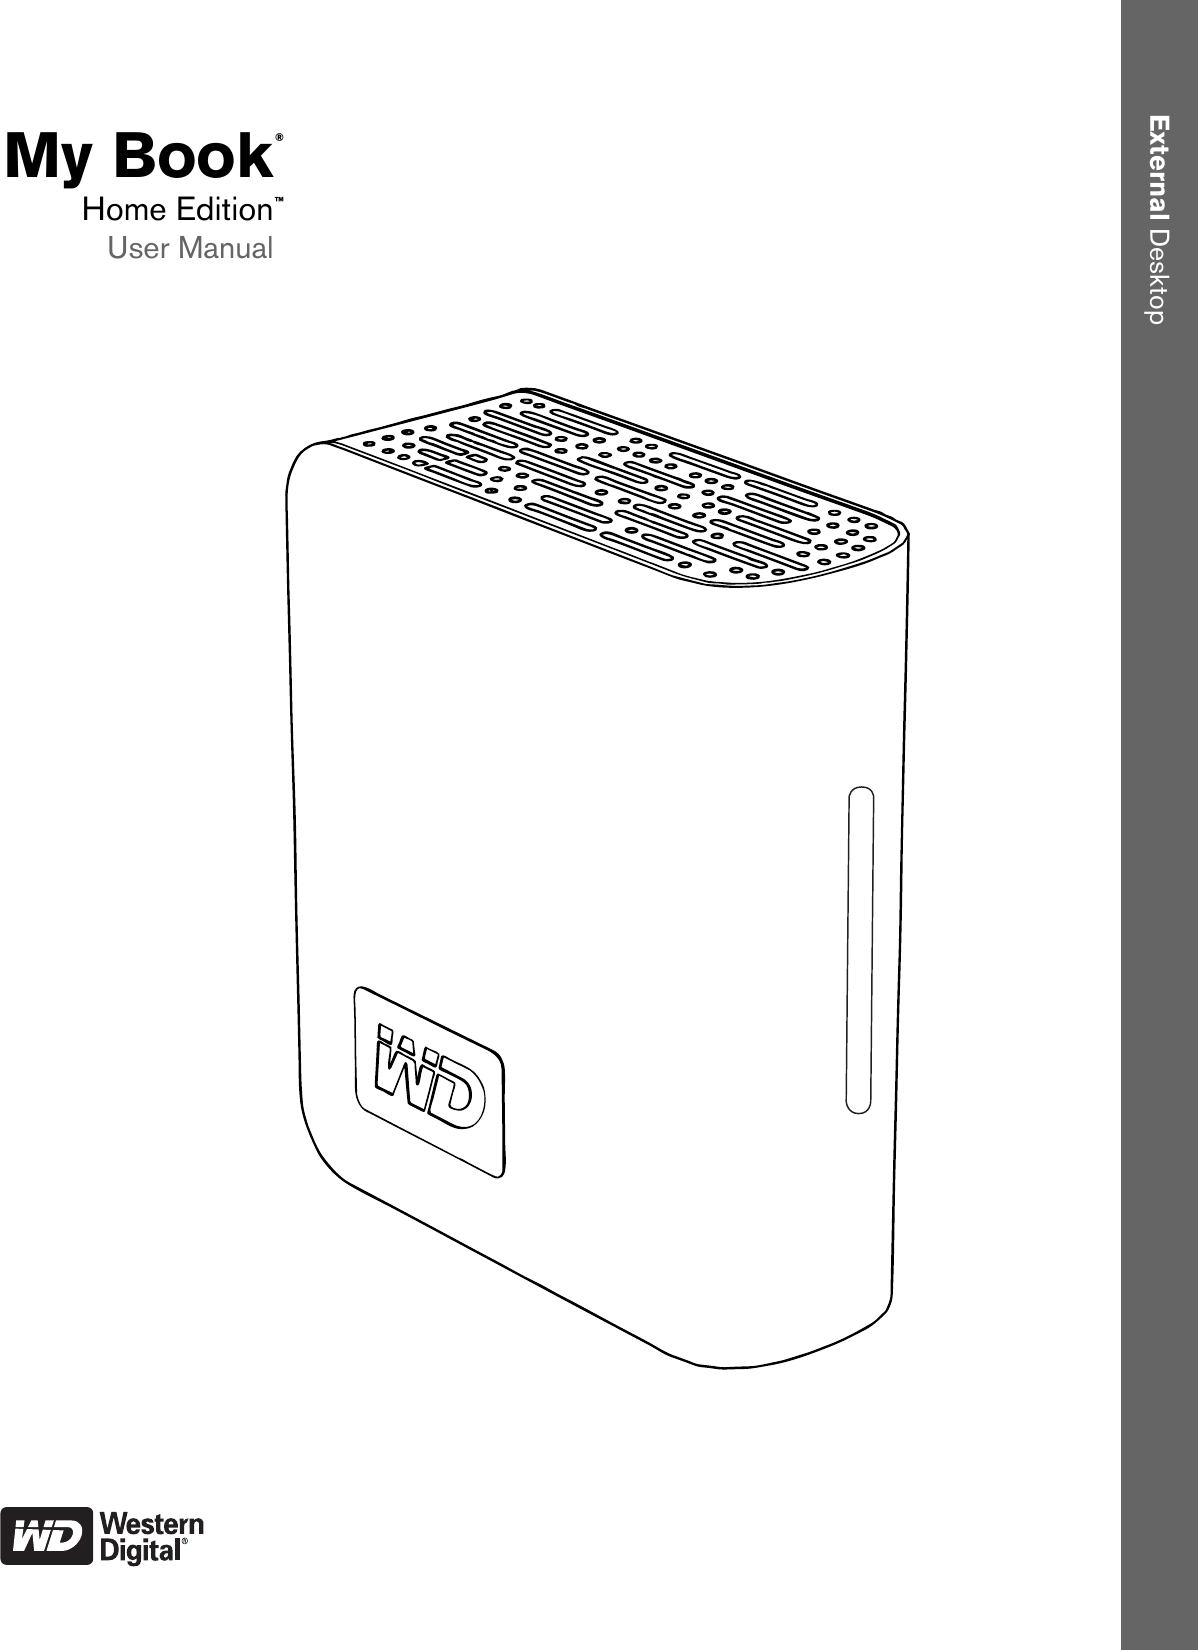 Page 1 of 10 - Western-Digital Western-Digital-Wd10000H1U-00-Users-Manual-820173 My Book® Home Edition™ Quick Install Guide User Manual